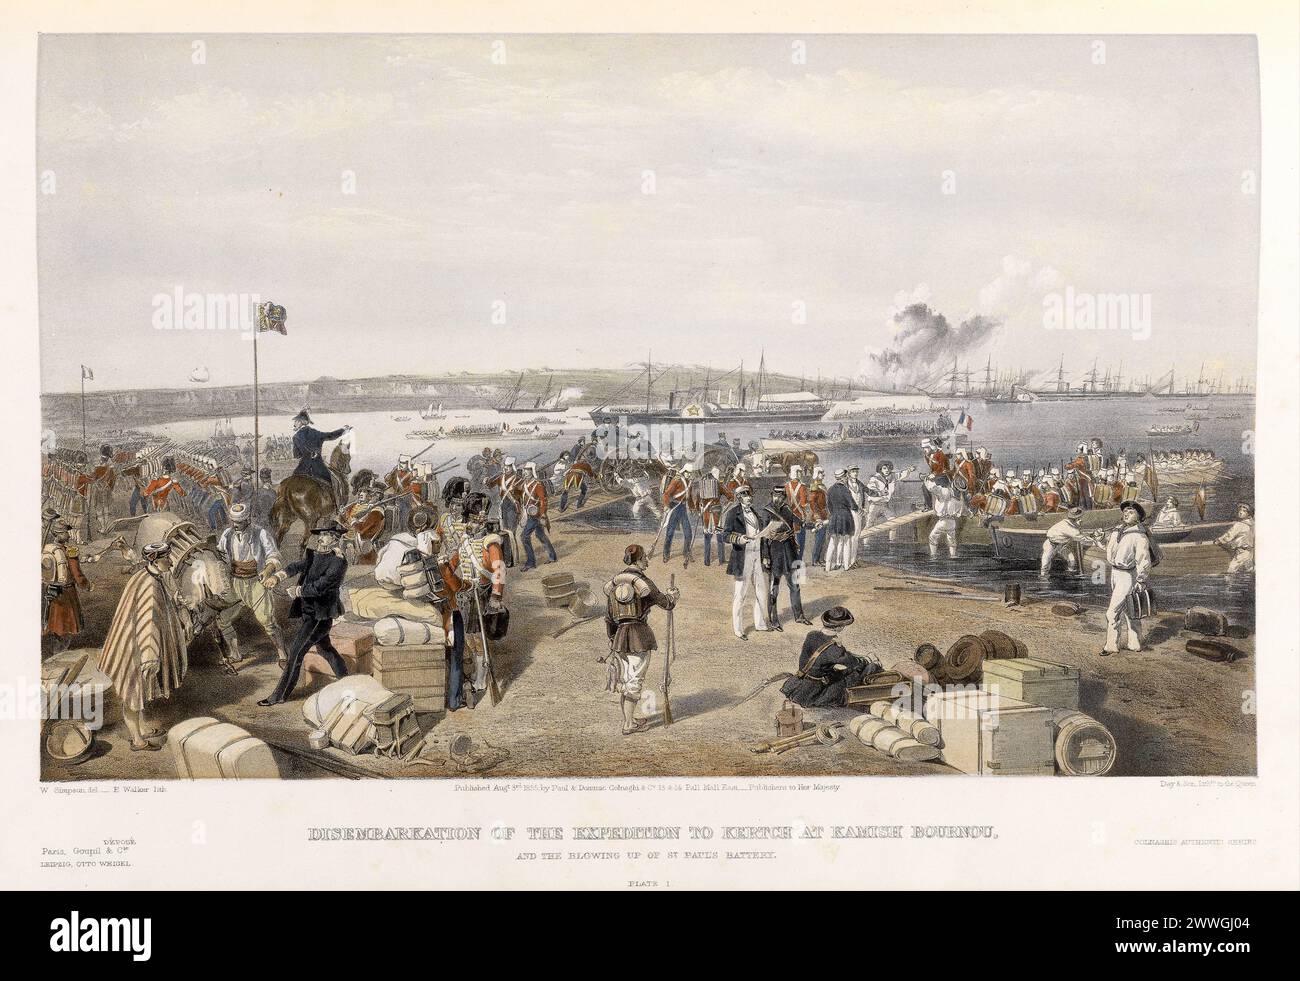 'Disembarcation of the Expedition to Kertch at Kamish Bournou'. Vintage historical Print of the Crimean War, from The Seat of the War in the East by William Simpson, 1855 Stock Photo